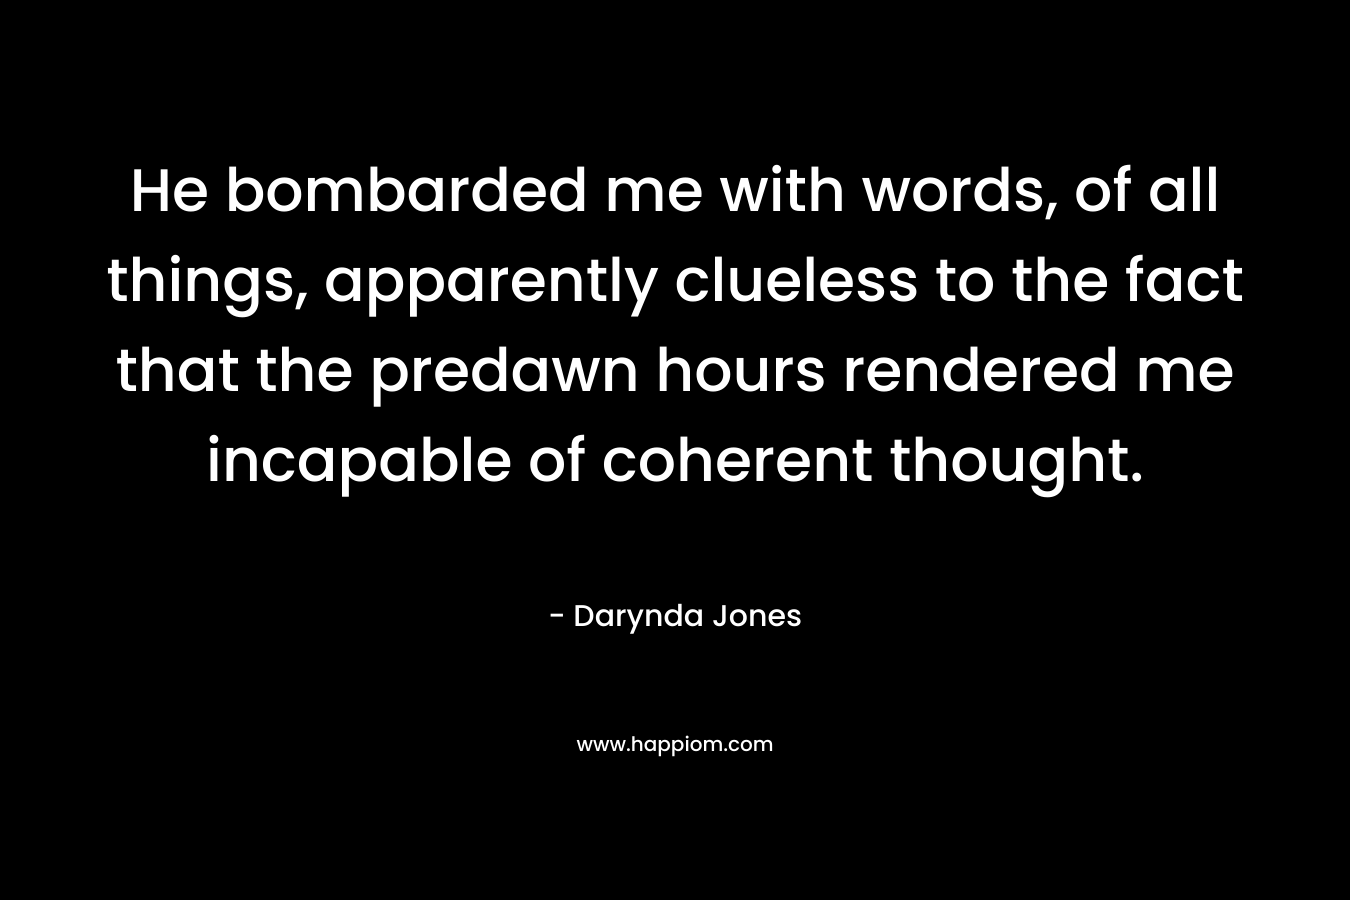 He bombarded me with words, of all things, apparently clueless to the fact that the predawn hours rendered me incapable of coherent thought. – Darynda Jones